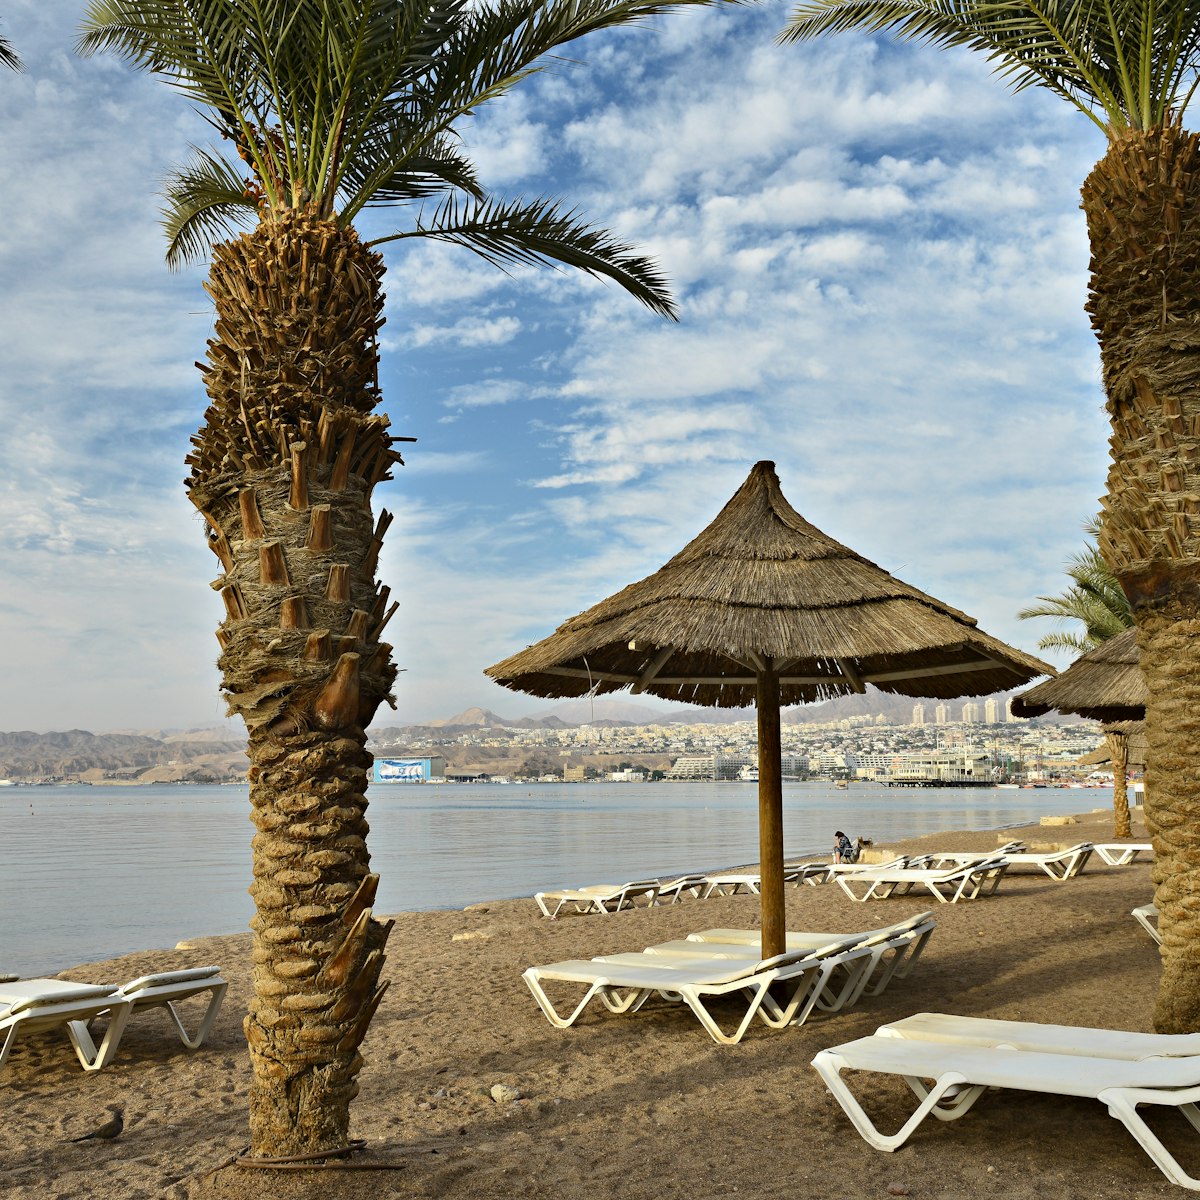 Morning view on the North beach of Eilat, Israel.